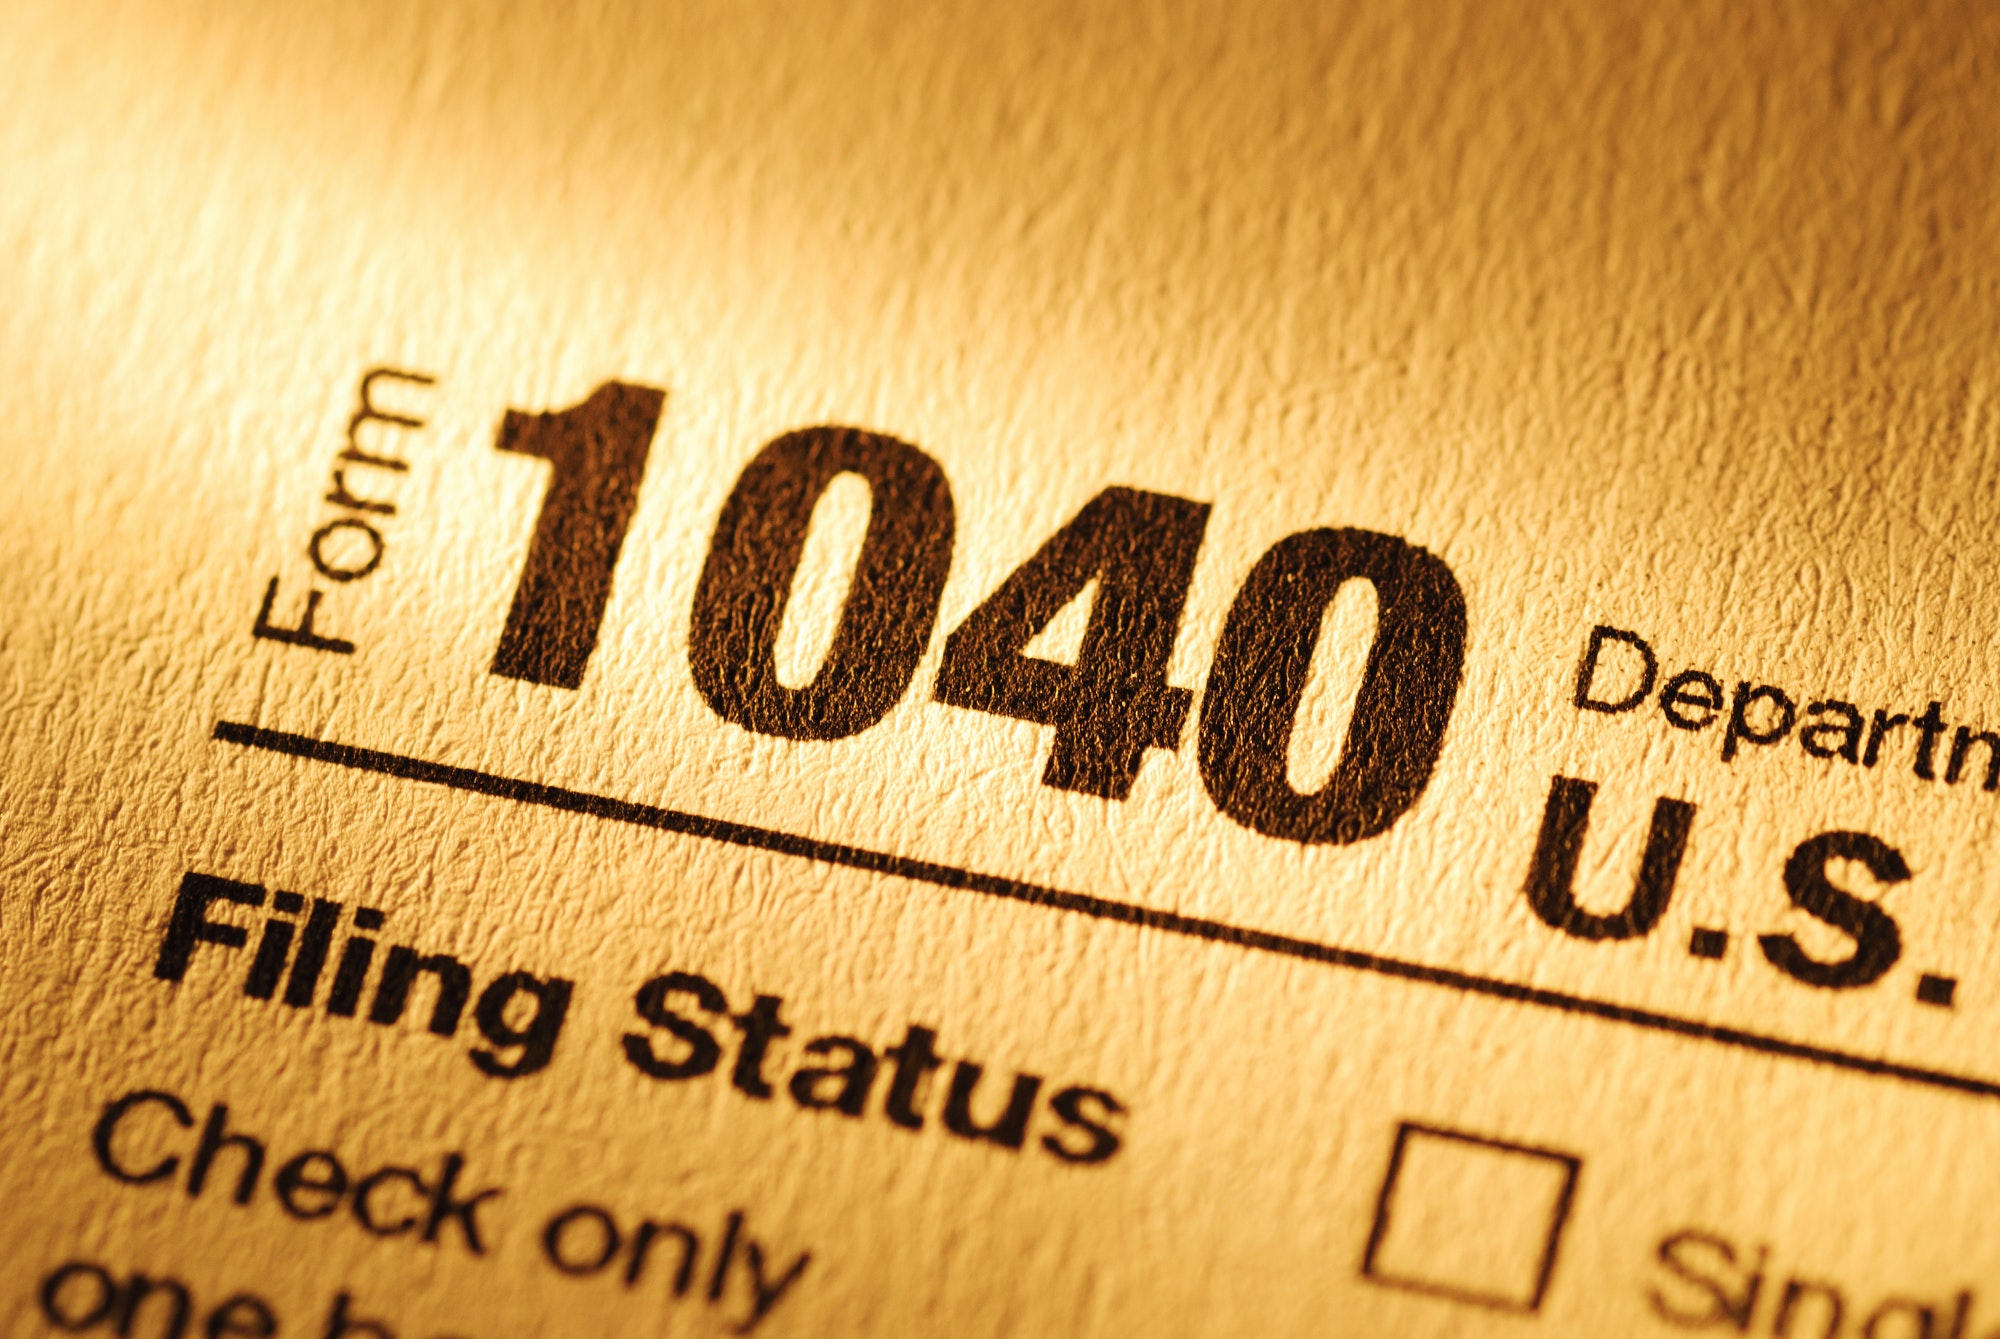 Form 1040 for declaration of Personal Income Tax